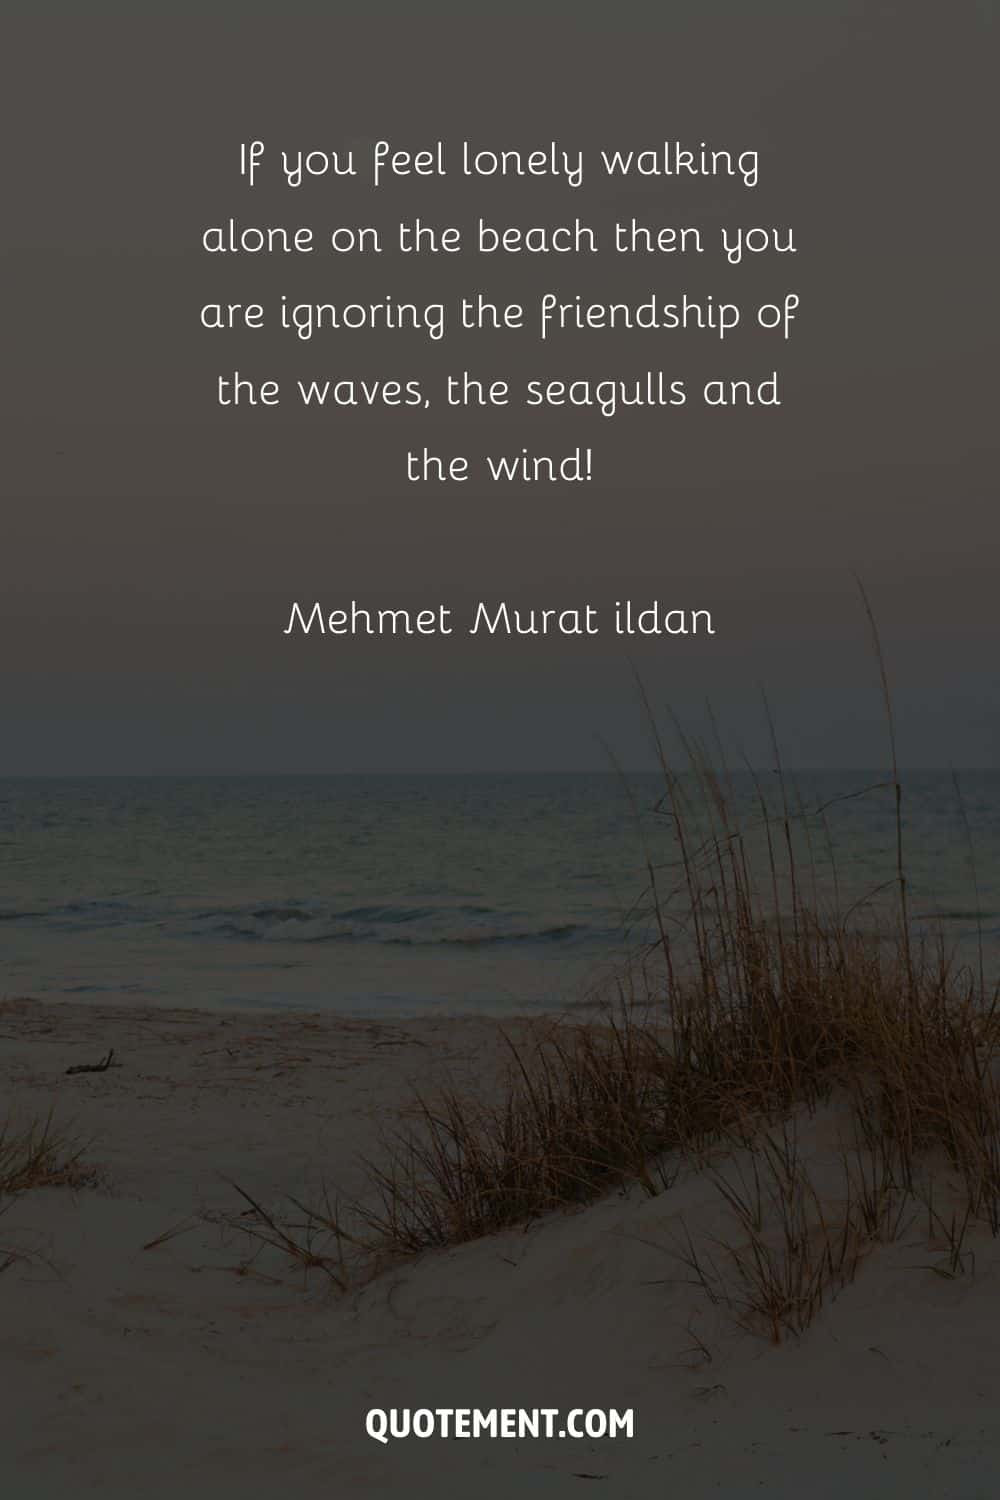 If you feel lonely walking alone on the beach then you are ignoring the friendship of the waves, the seagulls and the wind! — Mehmet Murat ildan